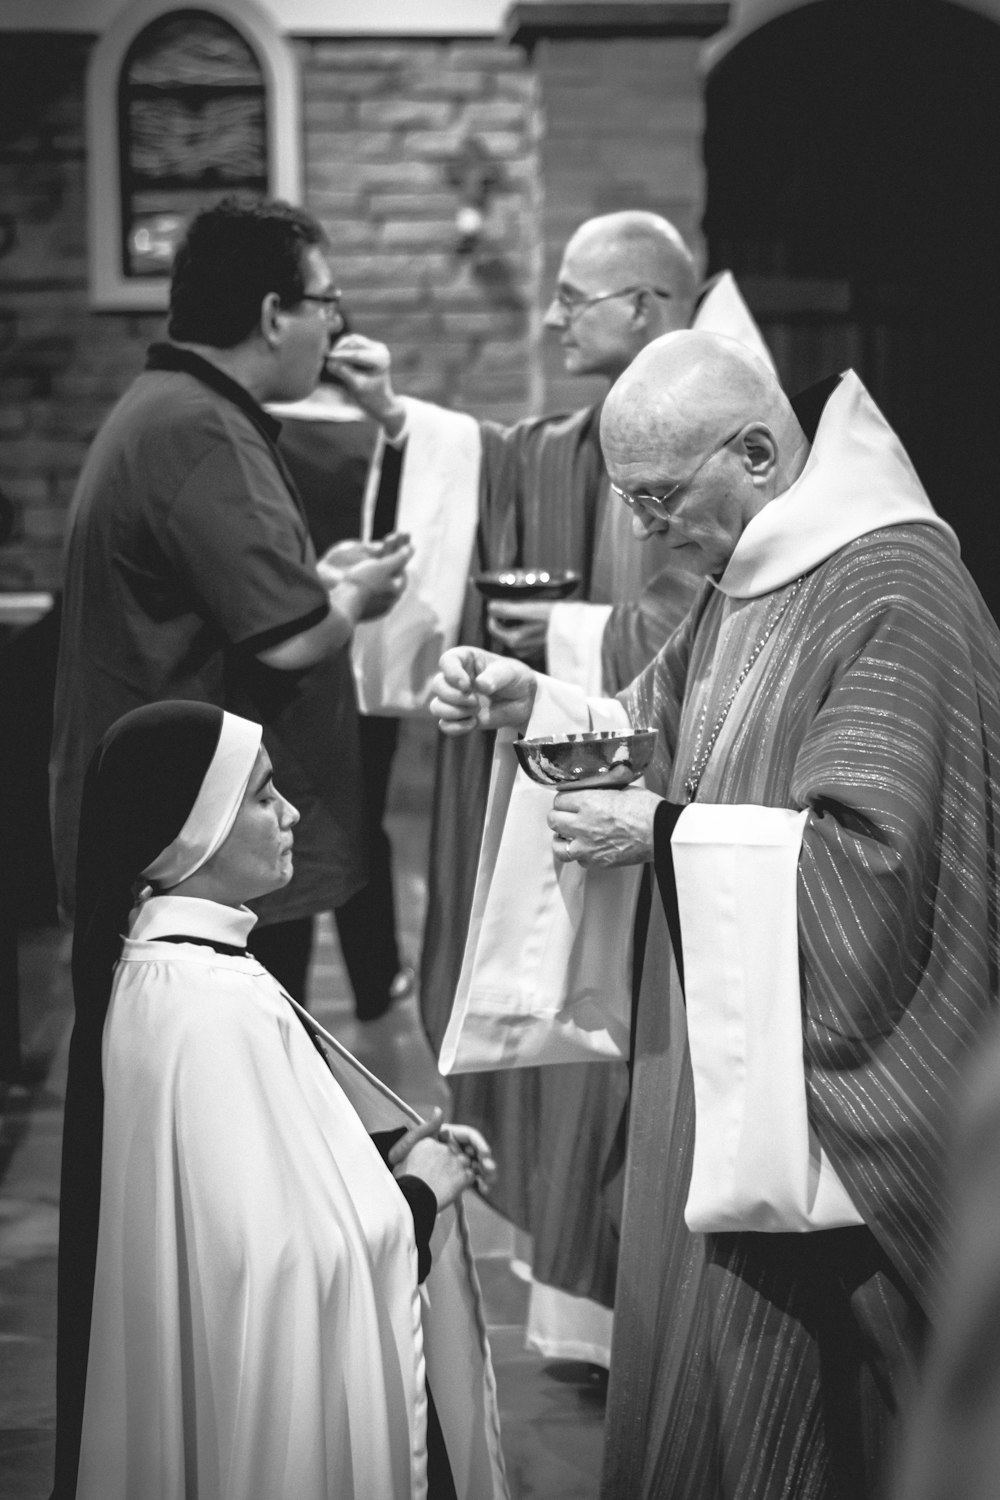 two priests giving Eucharist